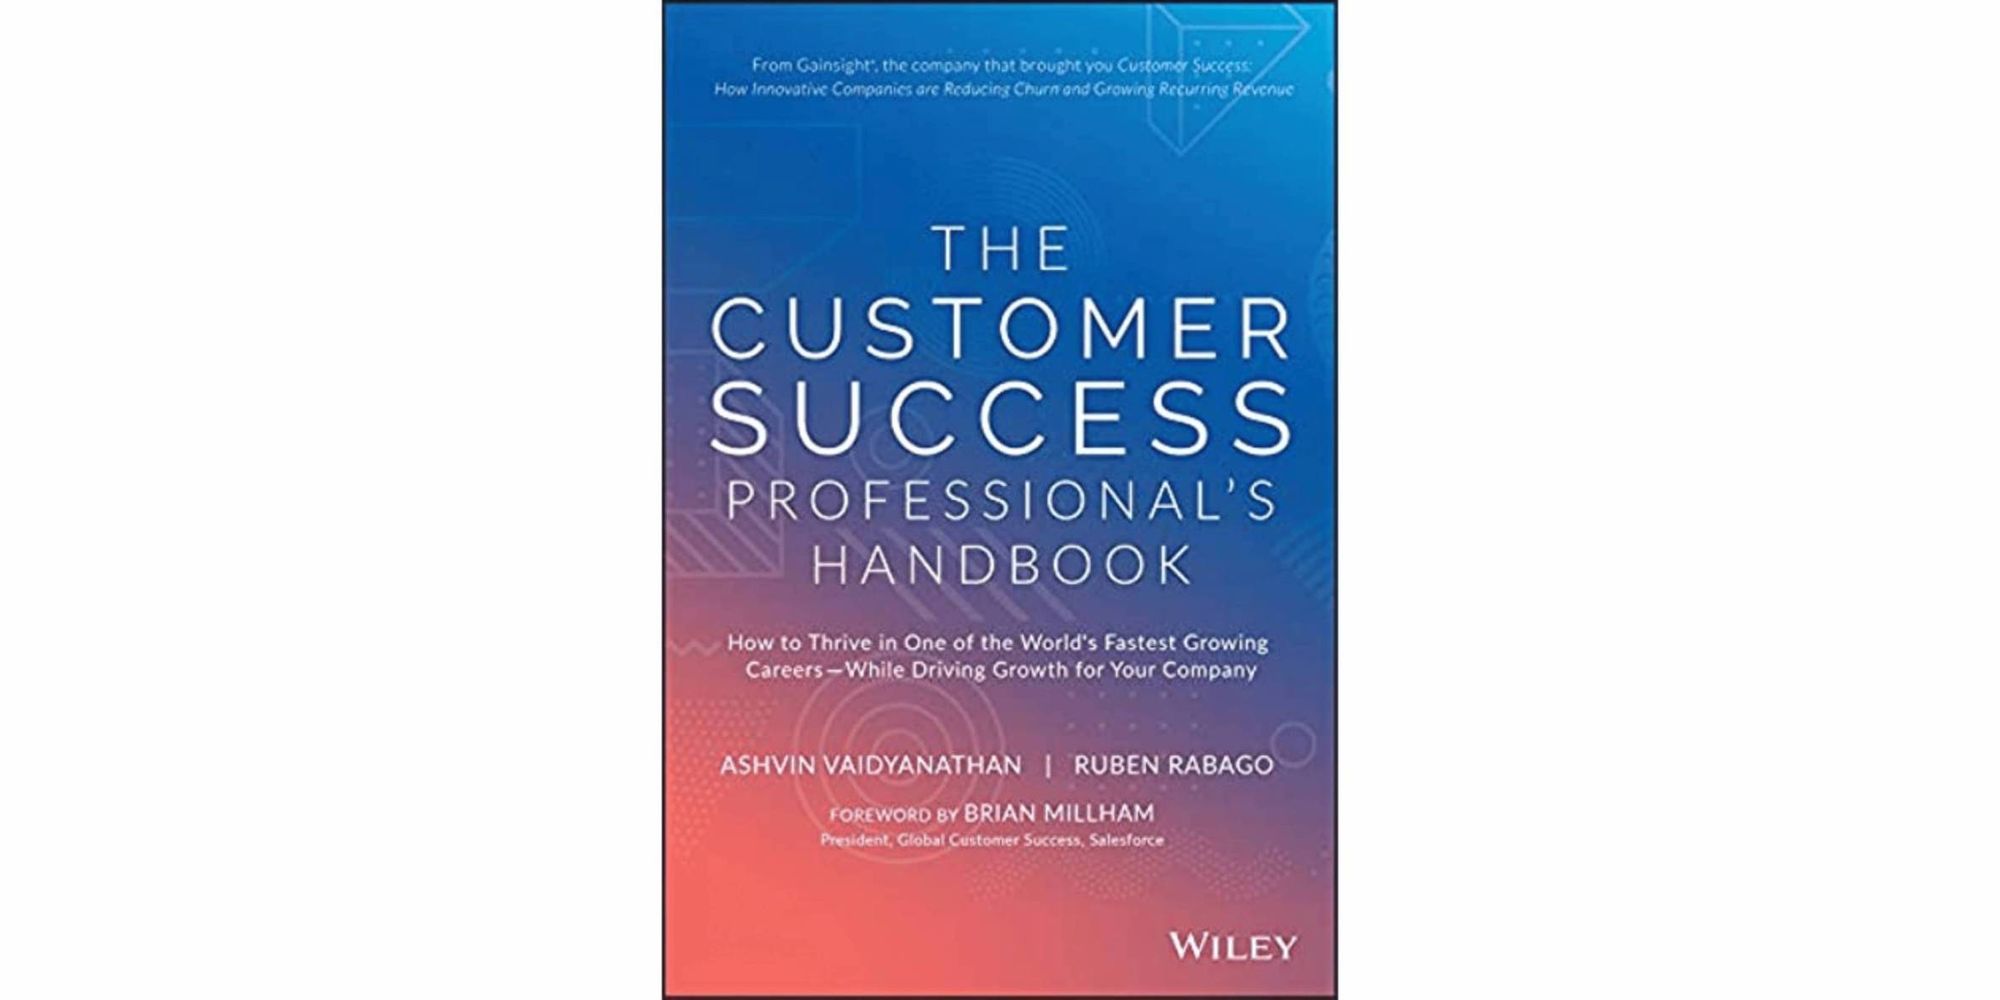 The Customer Success Professional's Handbook: How to Thrive in One of the World's Fastest Growing Careers – While Driving Growth For Your Company